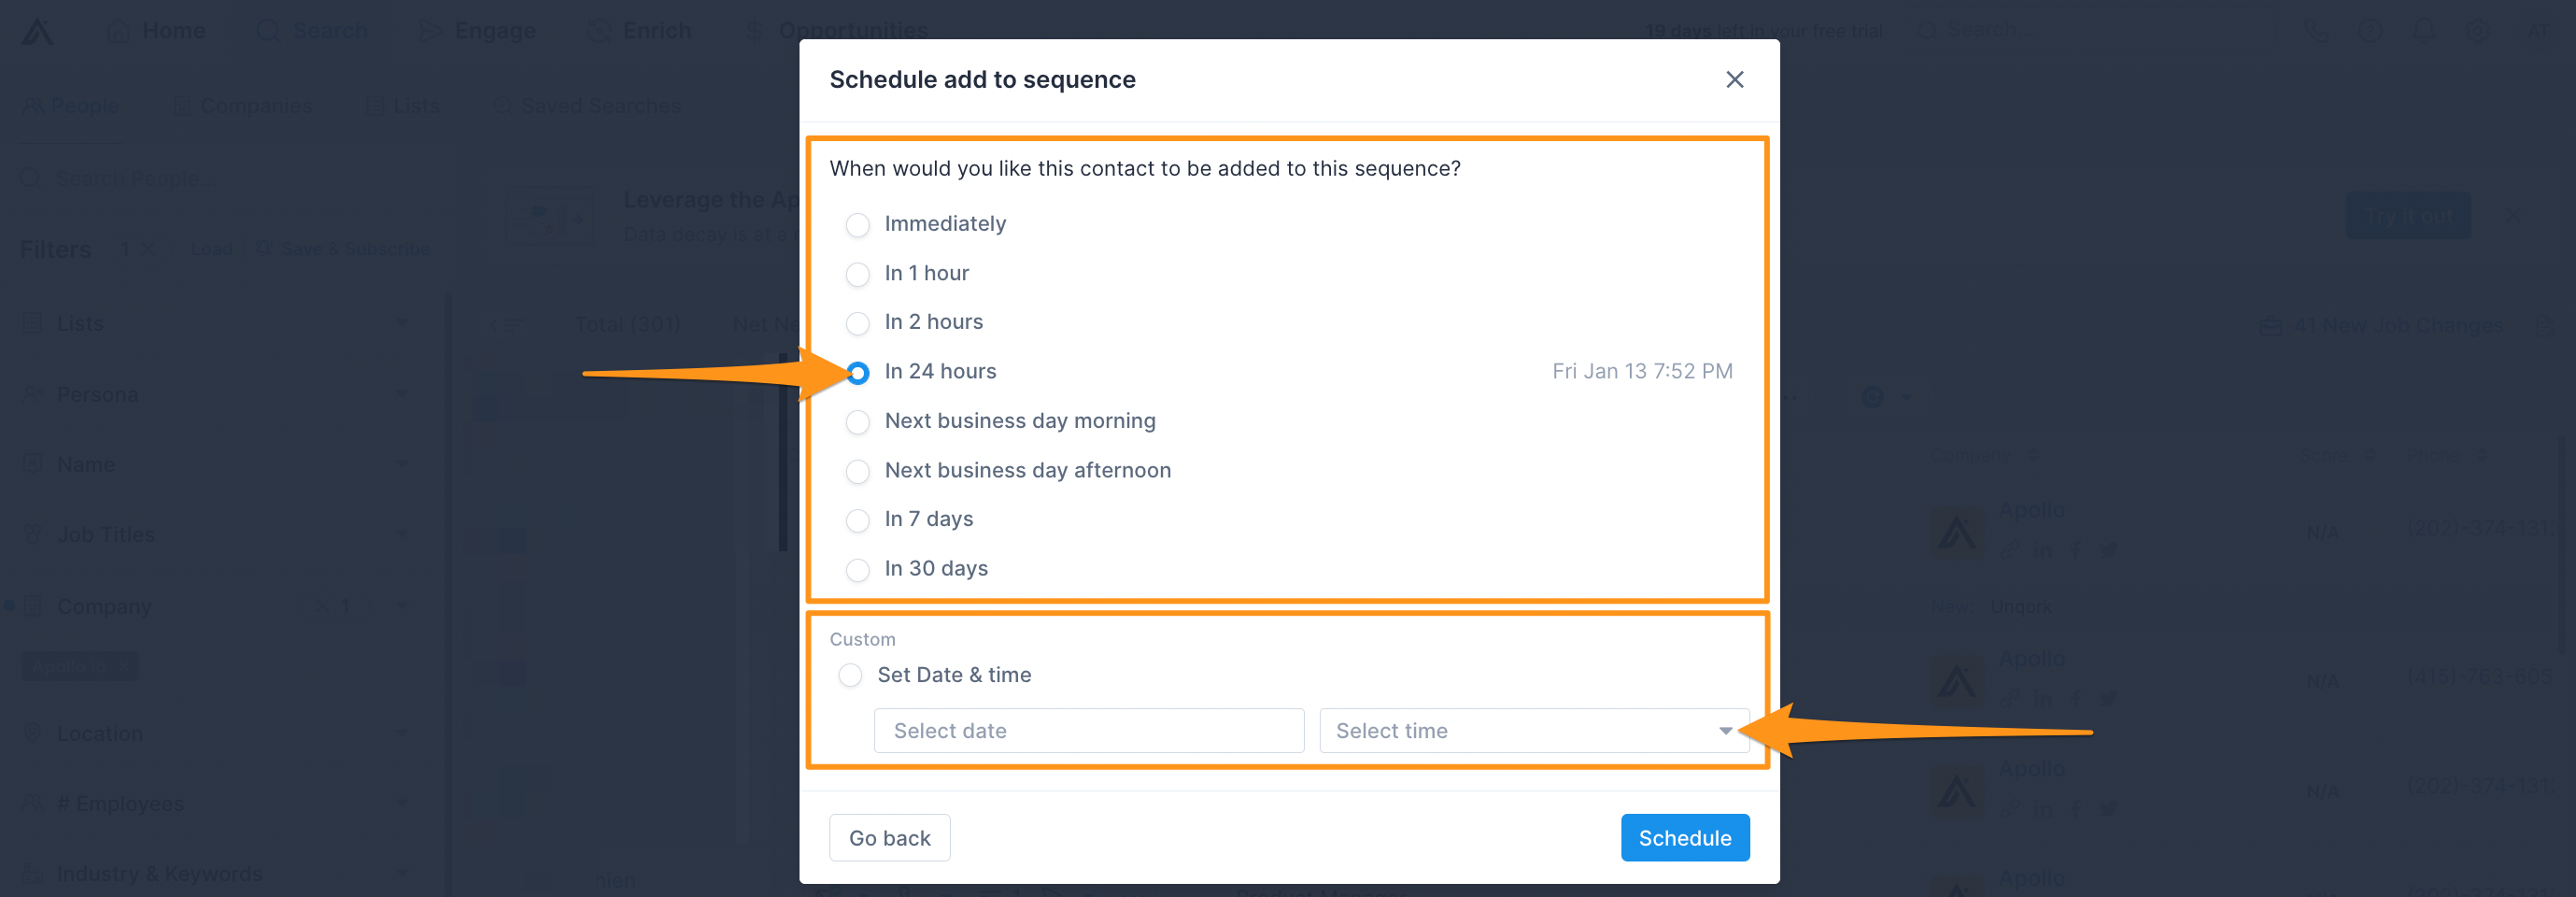 Schedule radio buttons in schedule add to sequence modal